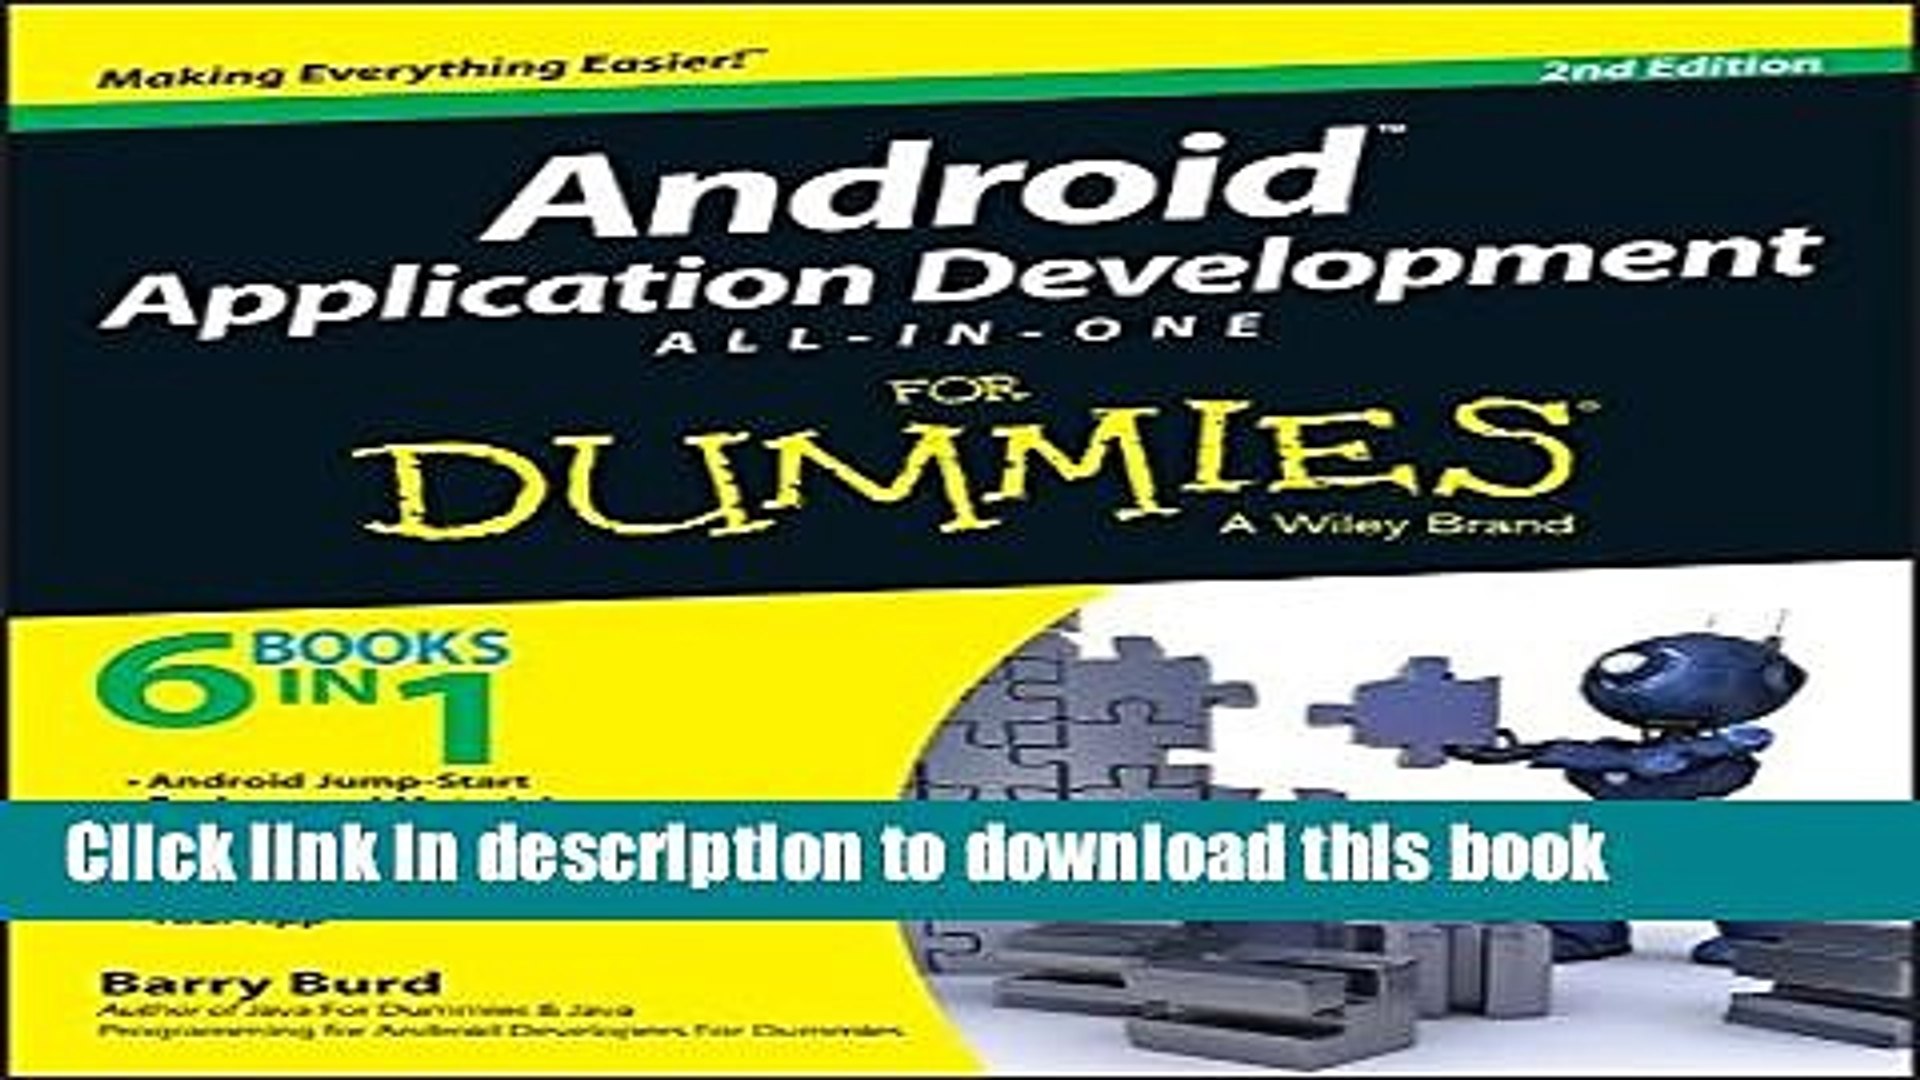 Android Application Development All-in-one For Dummies 2nd Edition Download